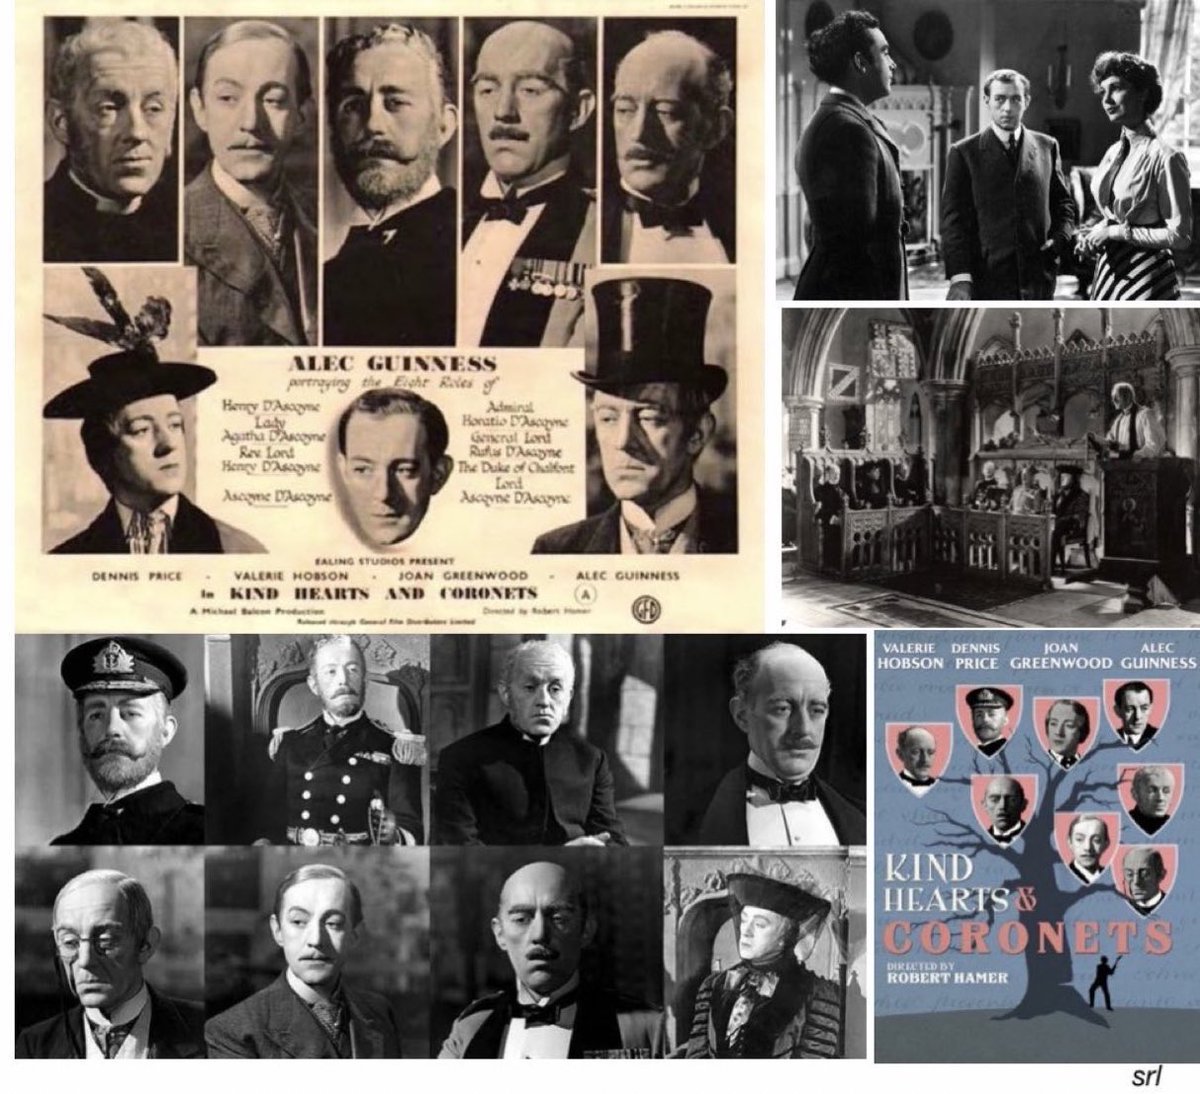 3:55pm TODAY on @Film4      👉joint #TVFilmOfTheDay

The 1949 film🎥 “Kind Hearts and Coronets” directed by #RobertHamer & co-written with #JohnDighton

It’s loosely based on #RoyHorniman’s 1907 novel📖 “Israel Rank: The Autobiography of a Criminal”

🌟#AlecGuinness #DennisPrice